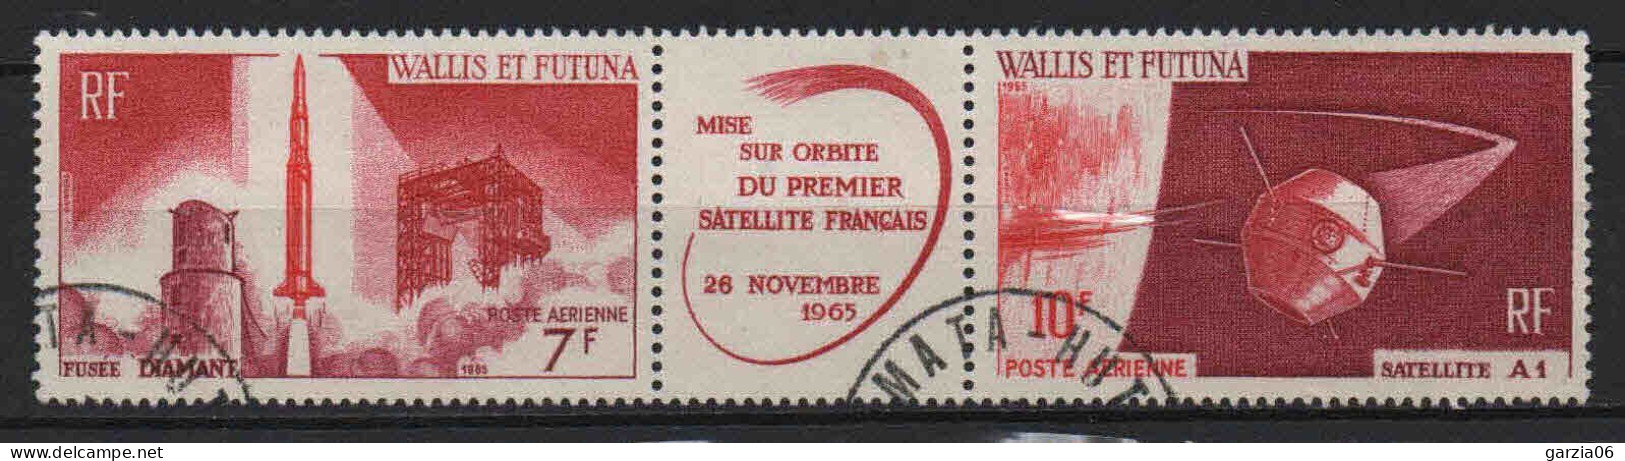 Wallis Et Futuna  - 1965  -  1ier Satellite Français  - PA 24/25A - Oblit - Used - Used Stamps